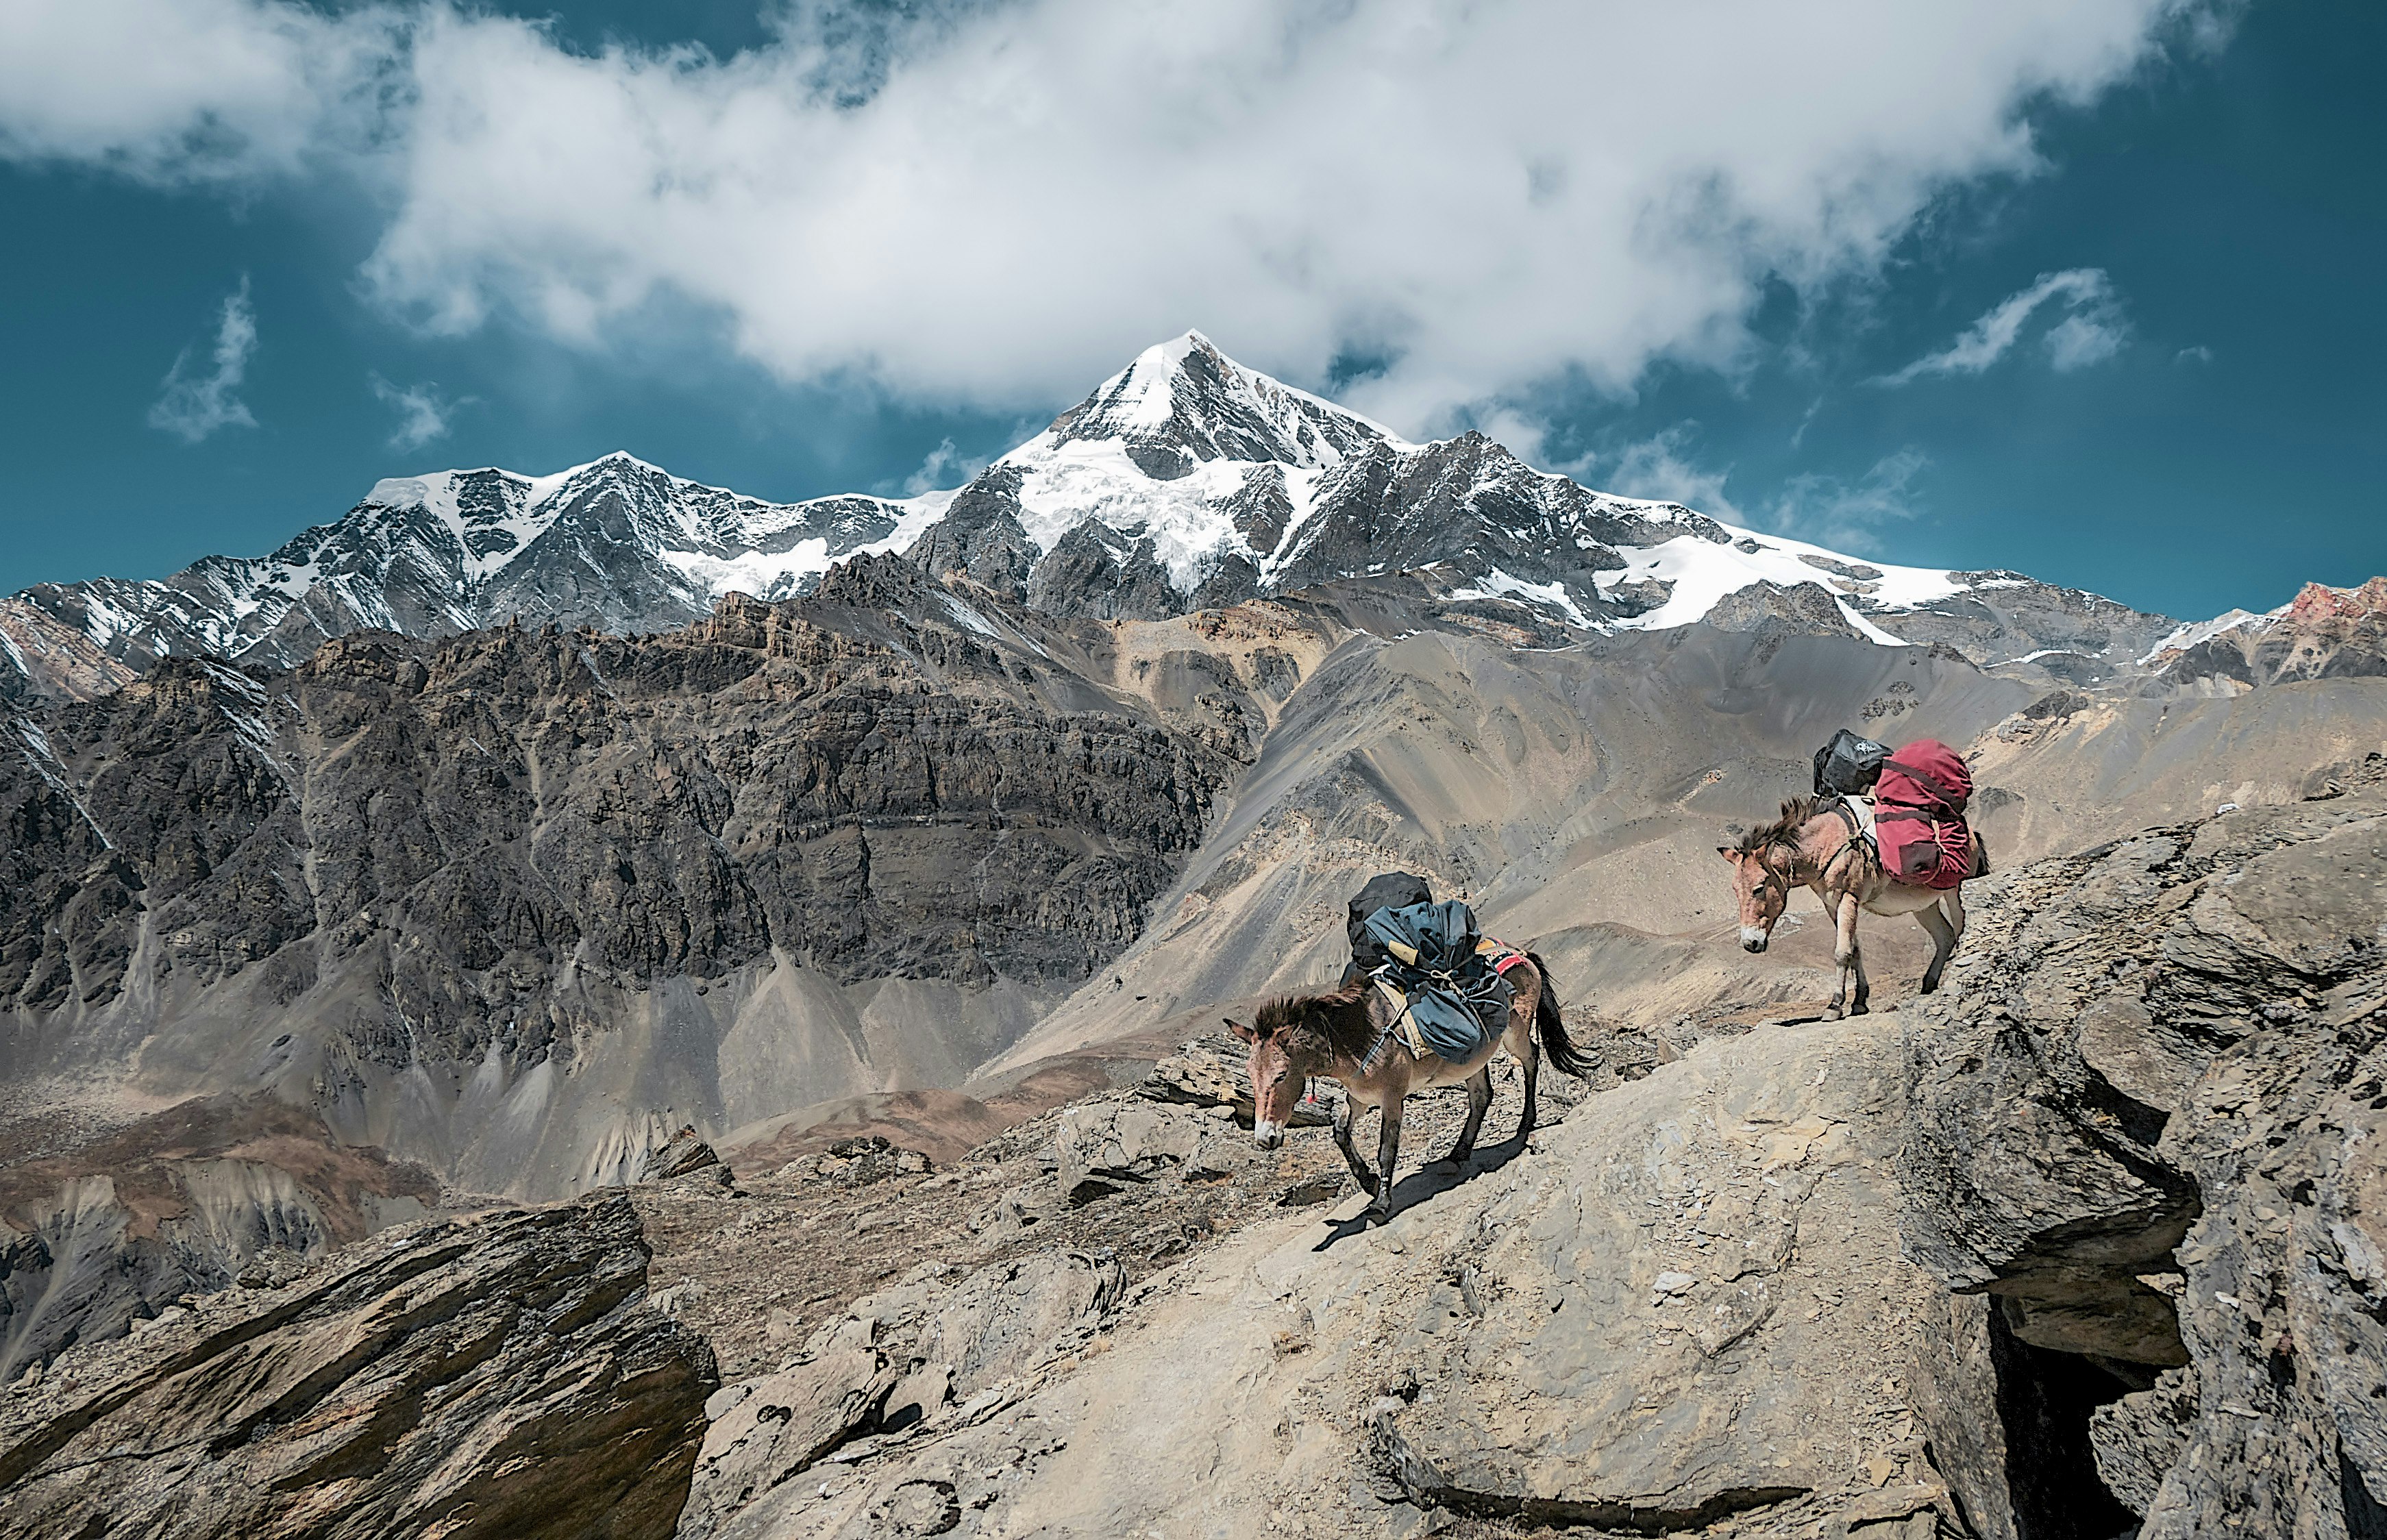 Our last hike in high altitude;
so tiring —
It made us look like donkeys.